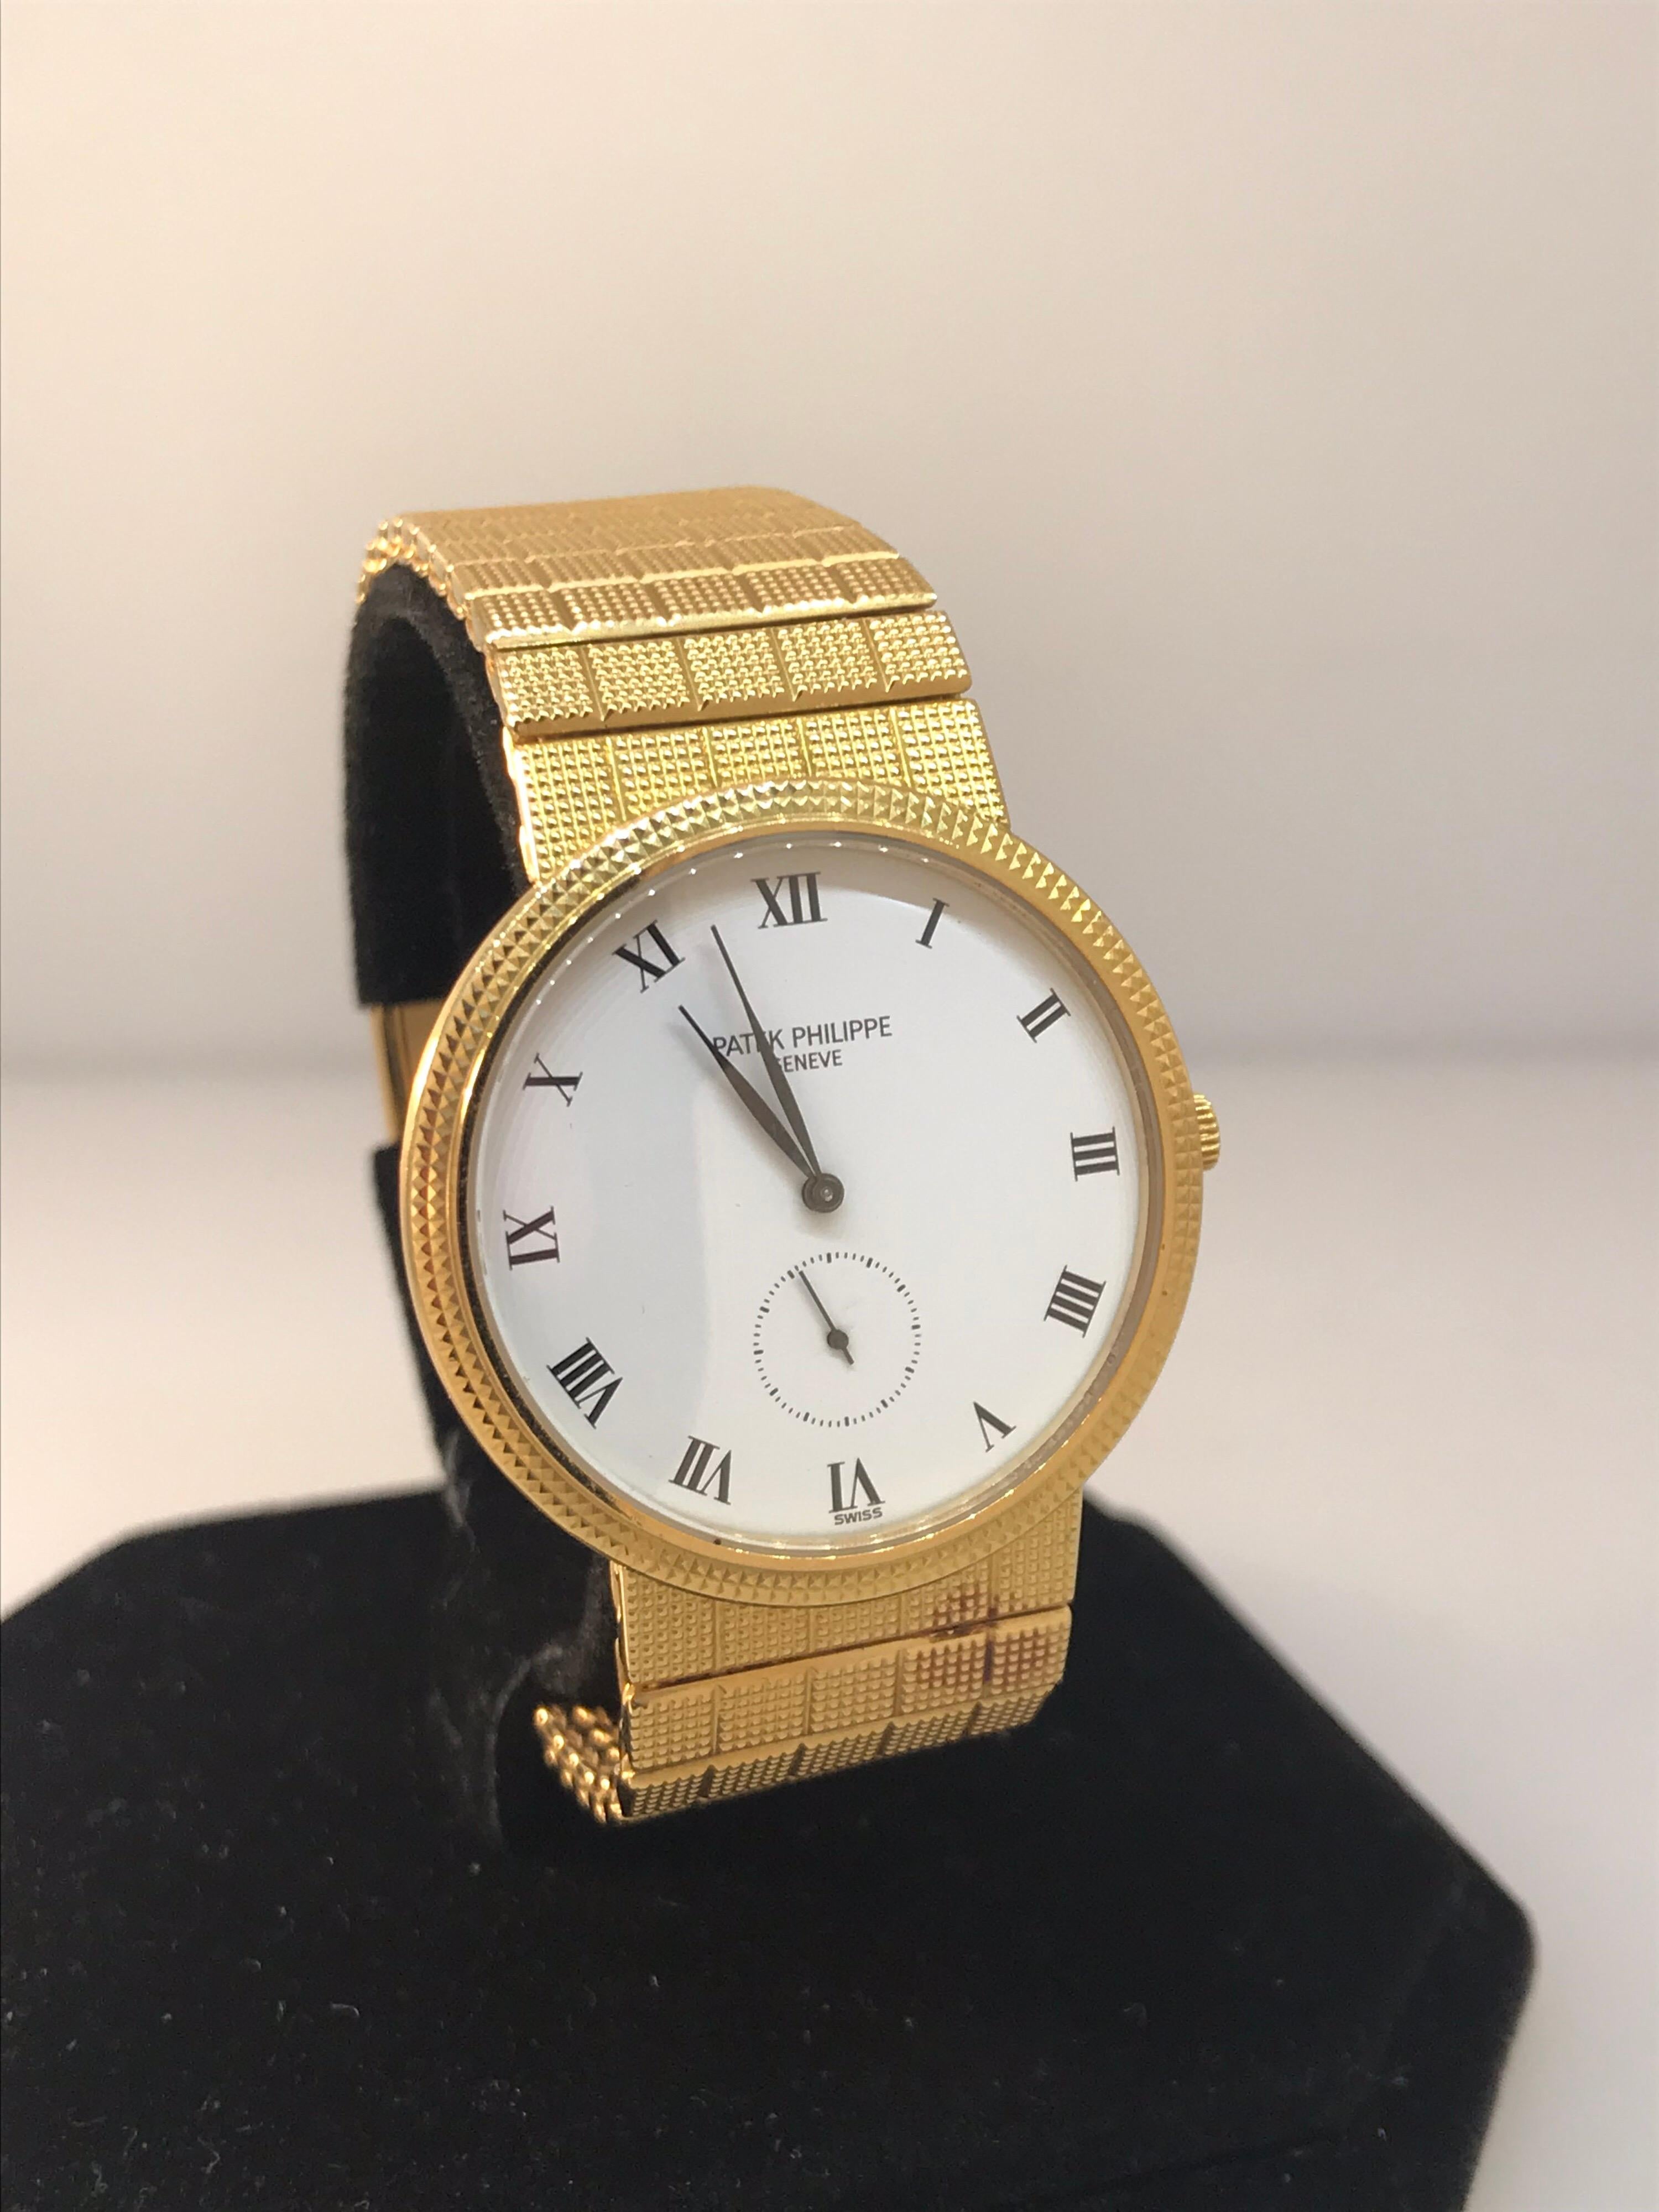 Patek Philippe Calatrava Men's Watch

Model Number: 3919/10

100% Authentic

Pre Owned in Excellent Condition

Comes with a generic watch box

18 Karat Yellow Gold Case & Bracelet

White Dial

Case Diameter: 33mm

Mechanical hand winding